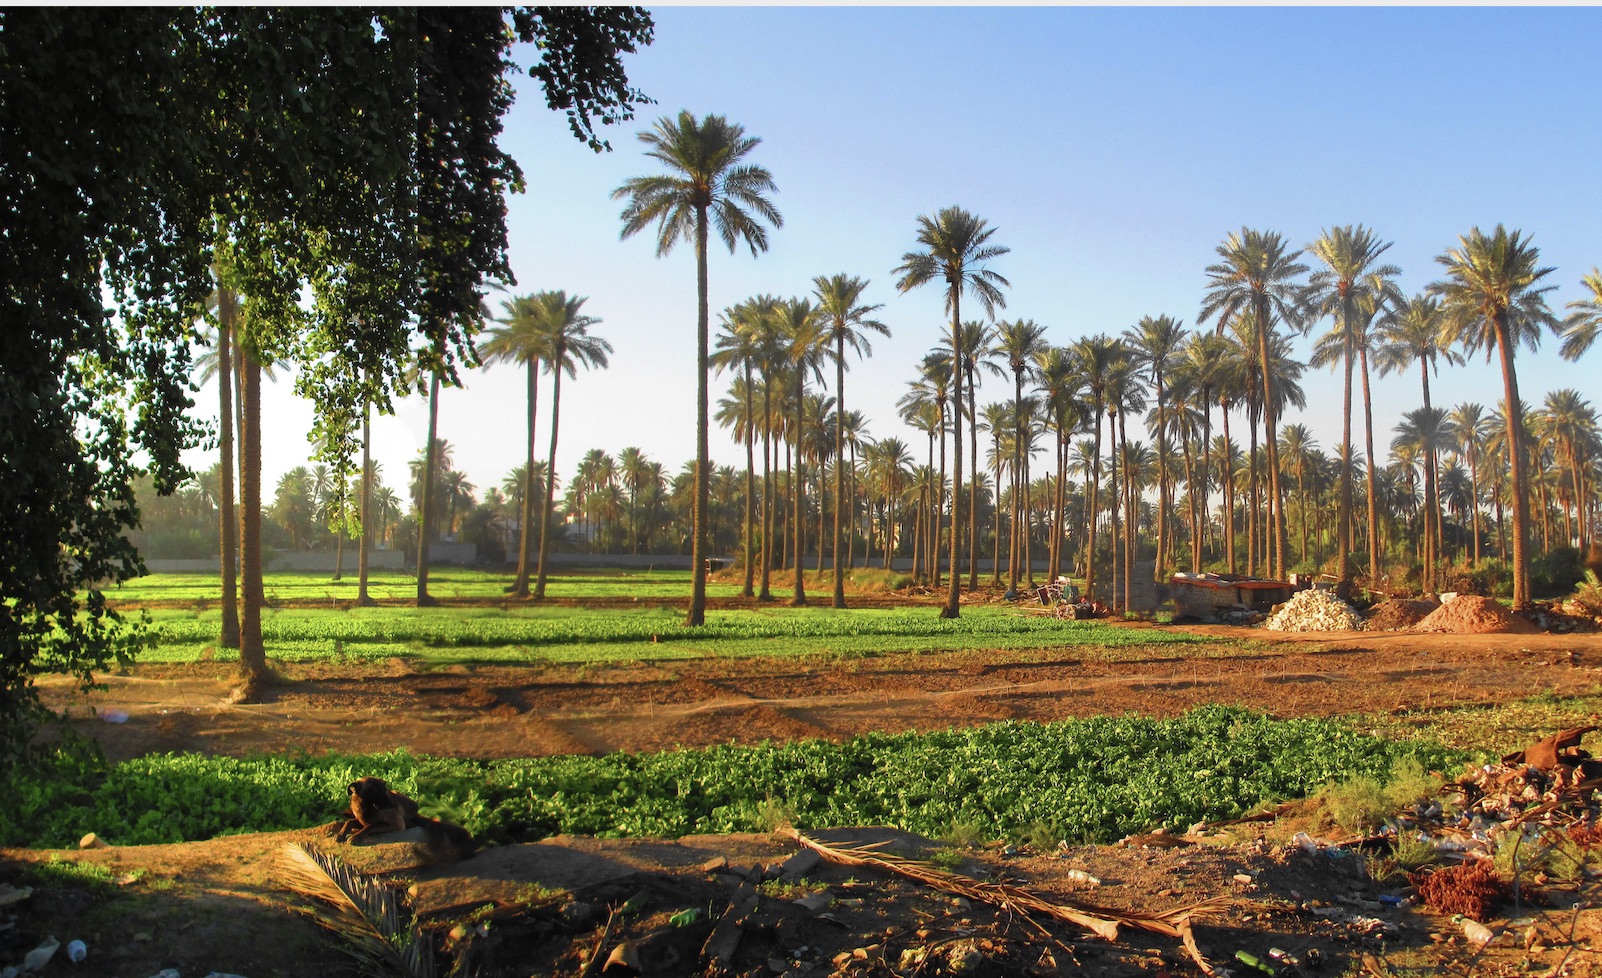 Egypt to Adopt Drought Tolerant Crops to Combat Water Scarcity ...